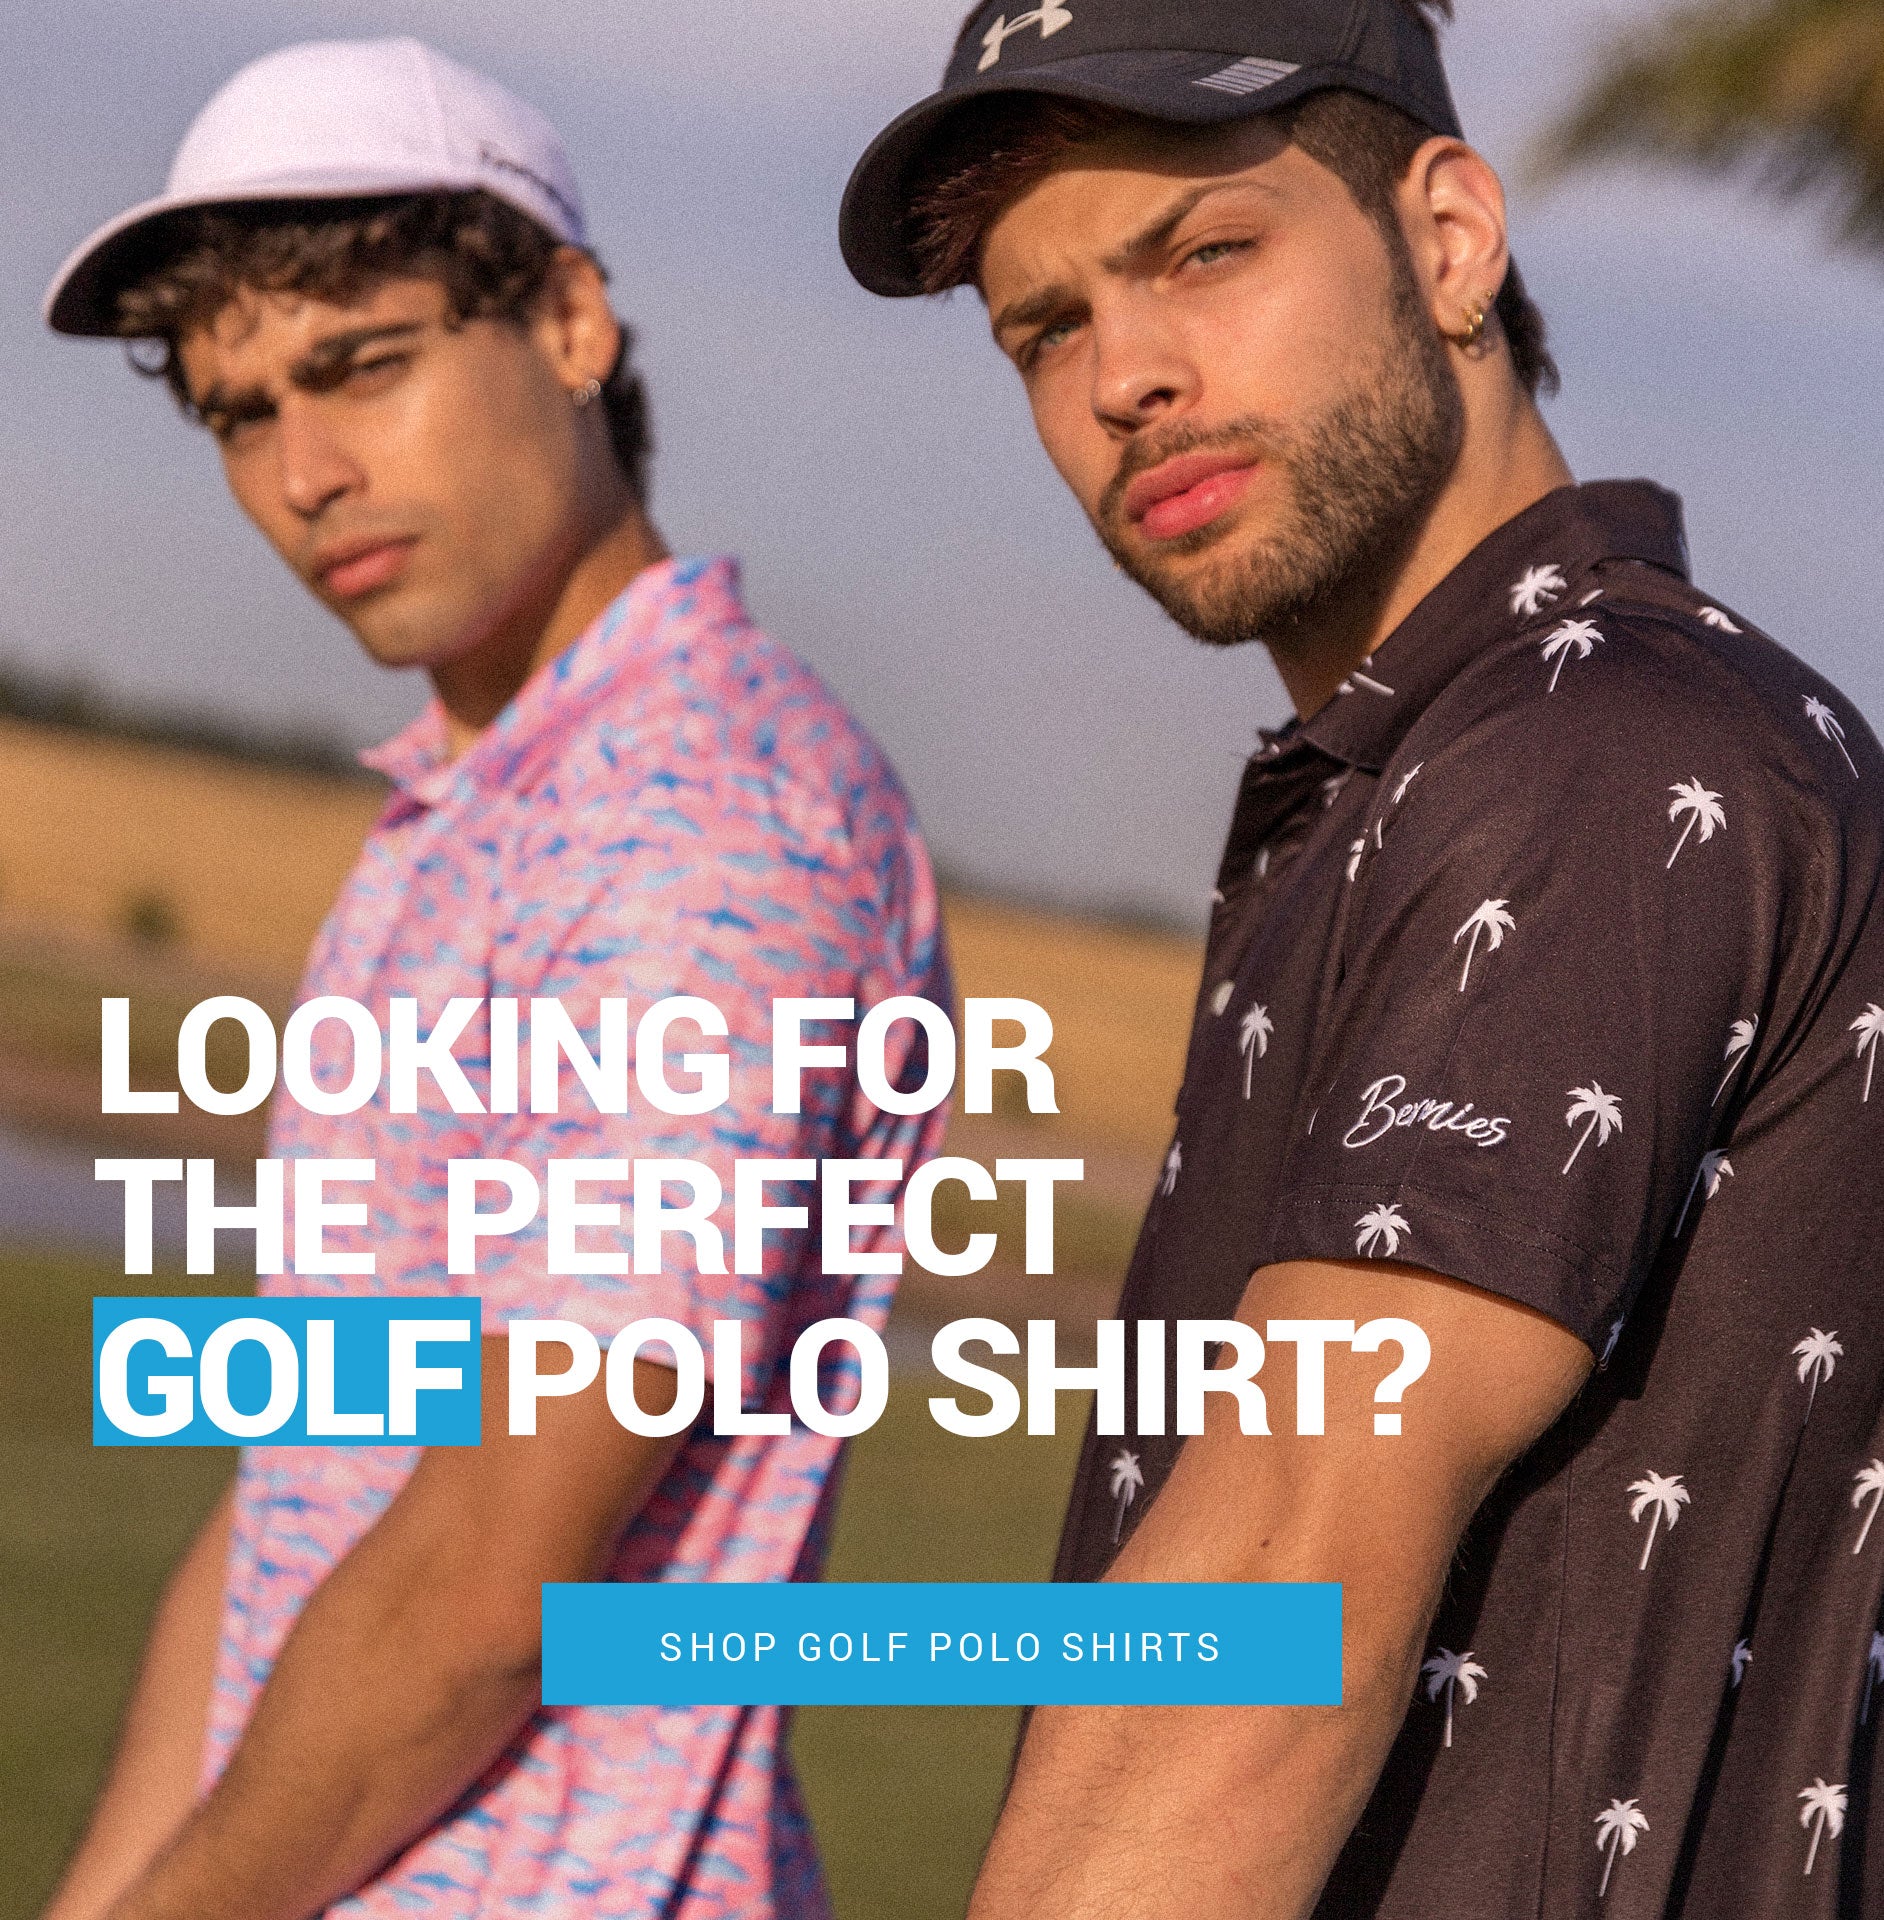 US OPEN 2022 and the perfect Performance Golf Polo Shirt